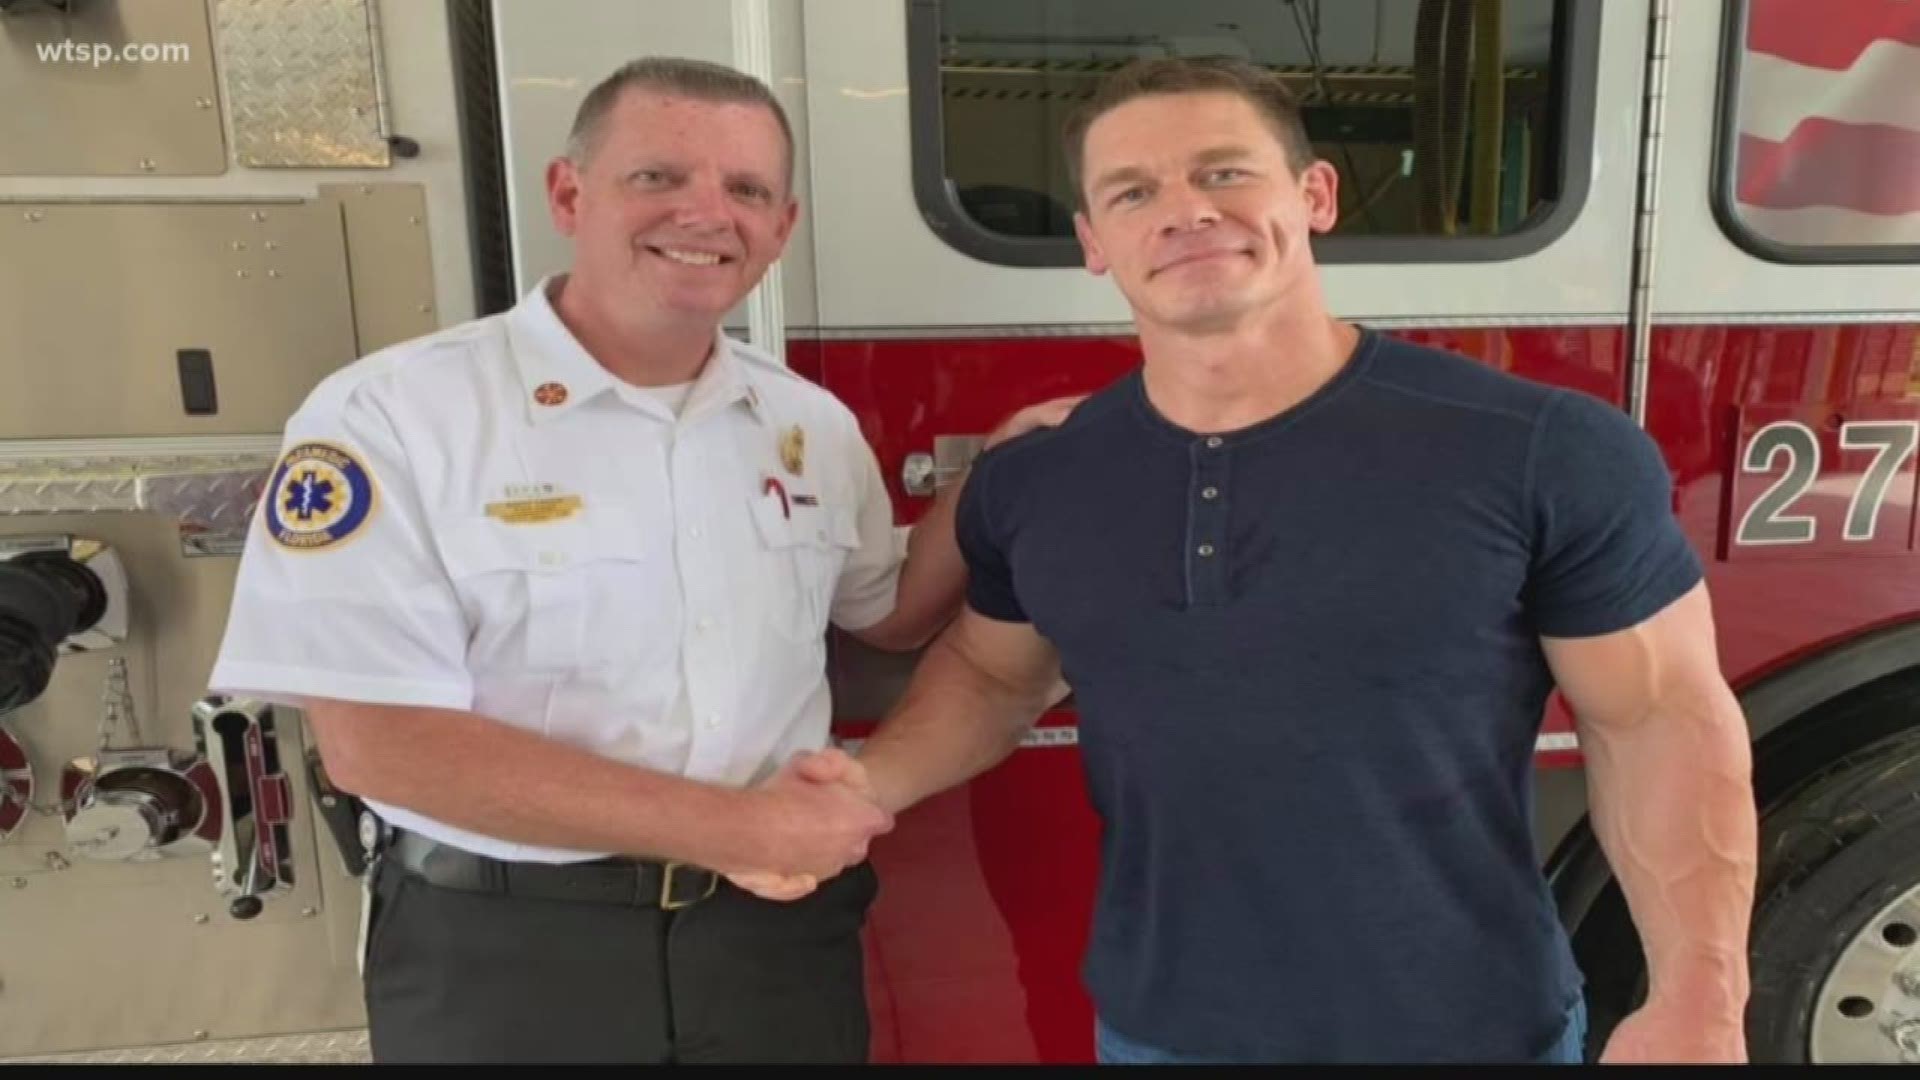 Actor and WWE star John Cena stopped by Pasco County Fire Rescue Station 58 to perform a media tour to television stations across the country previewing his new movie “Playing With Fire.” The film is set to debut on Nov. 8, 2019, in theaters.